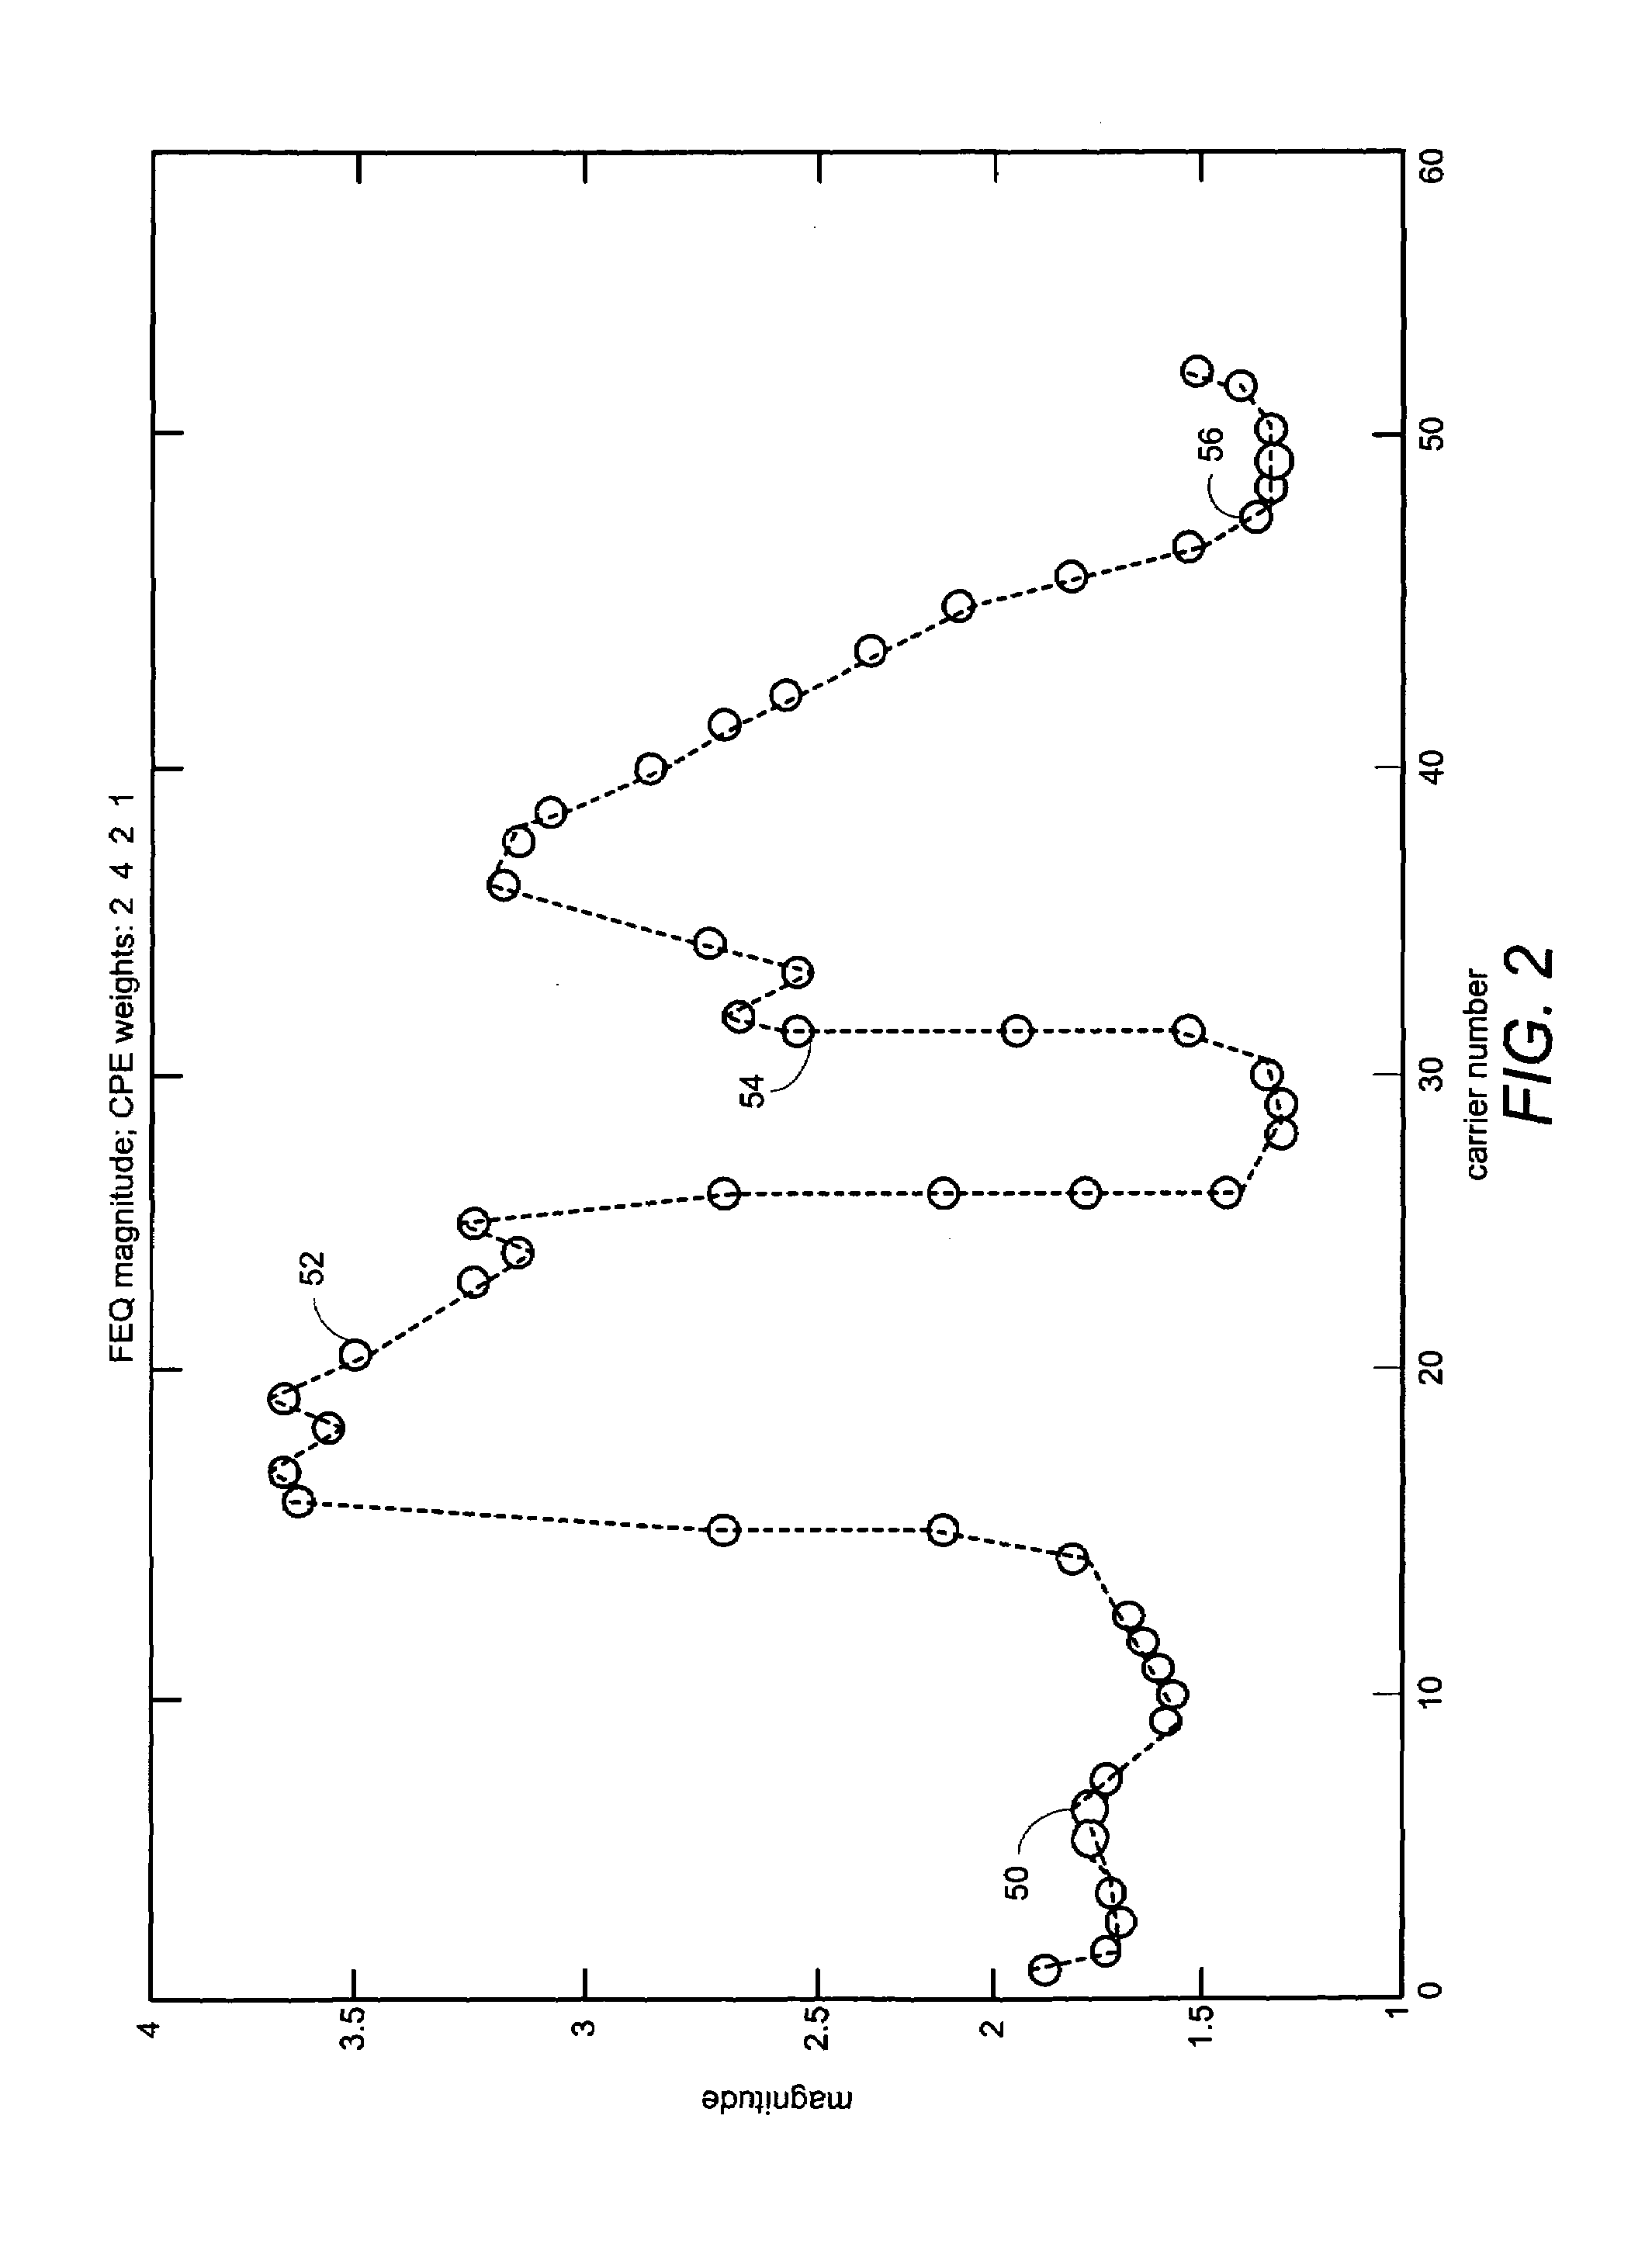 Efficient method for multi-path resistant carrier and timing frequency offset detection